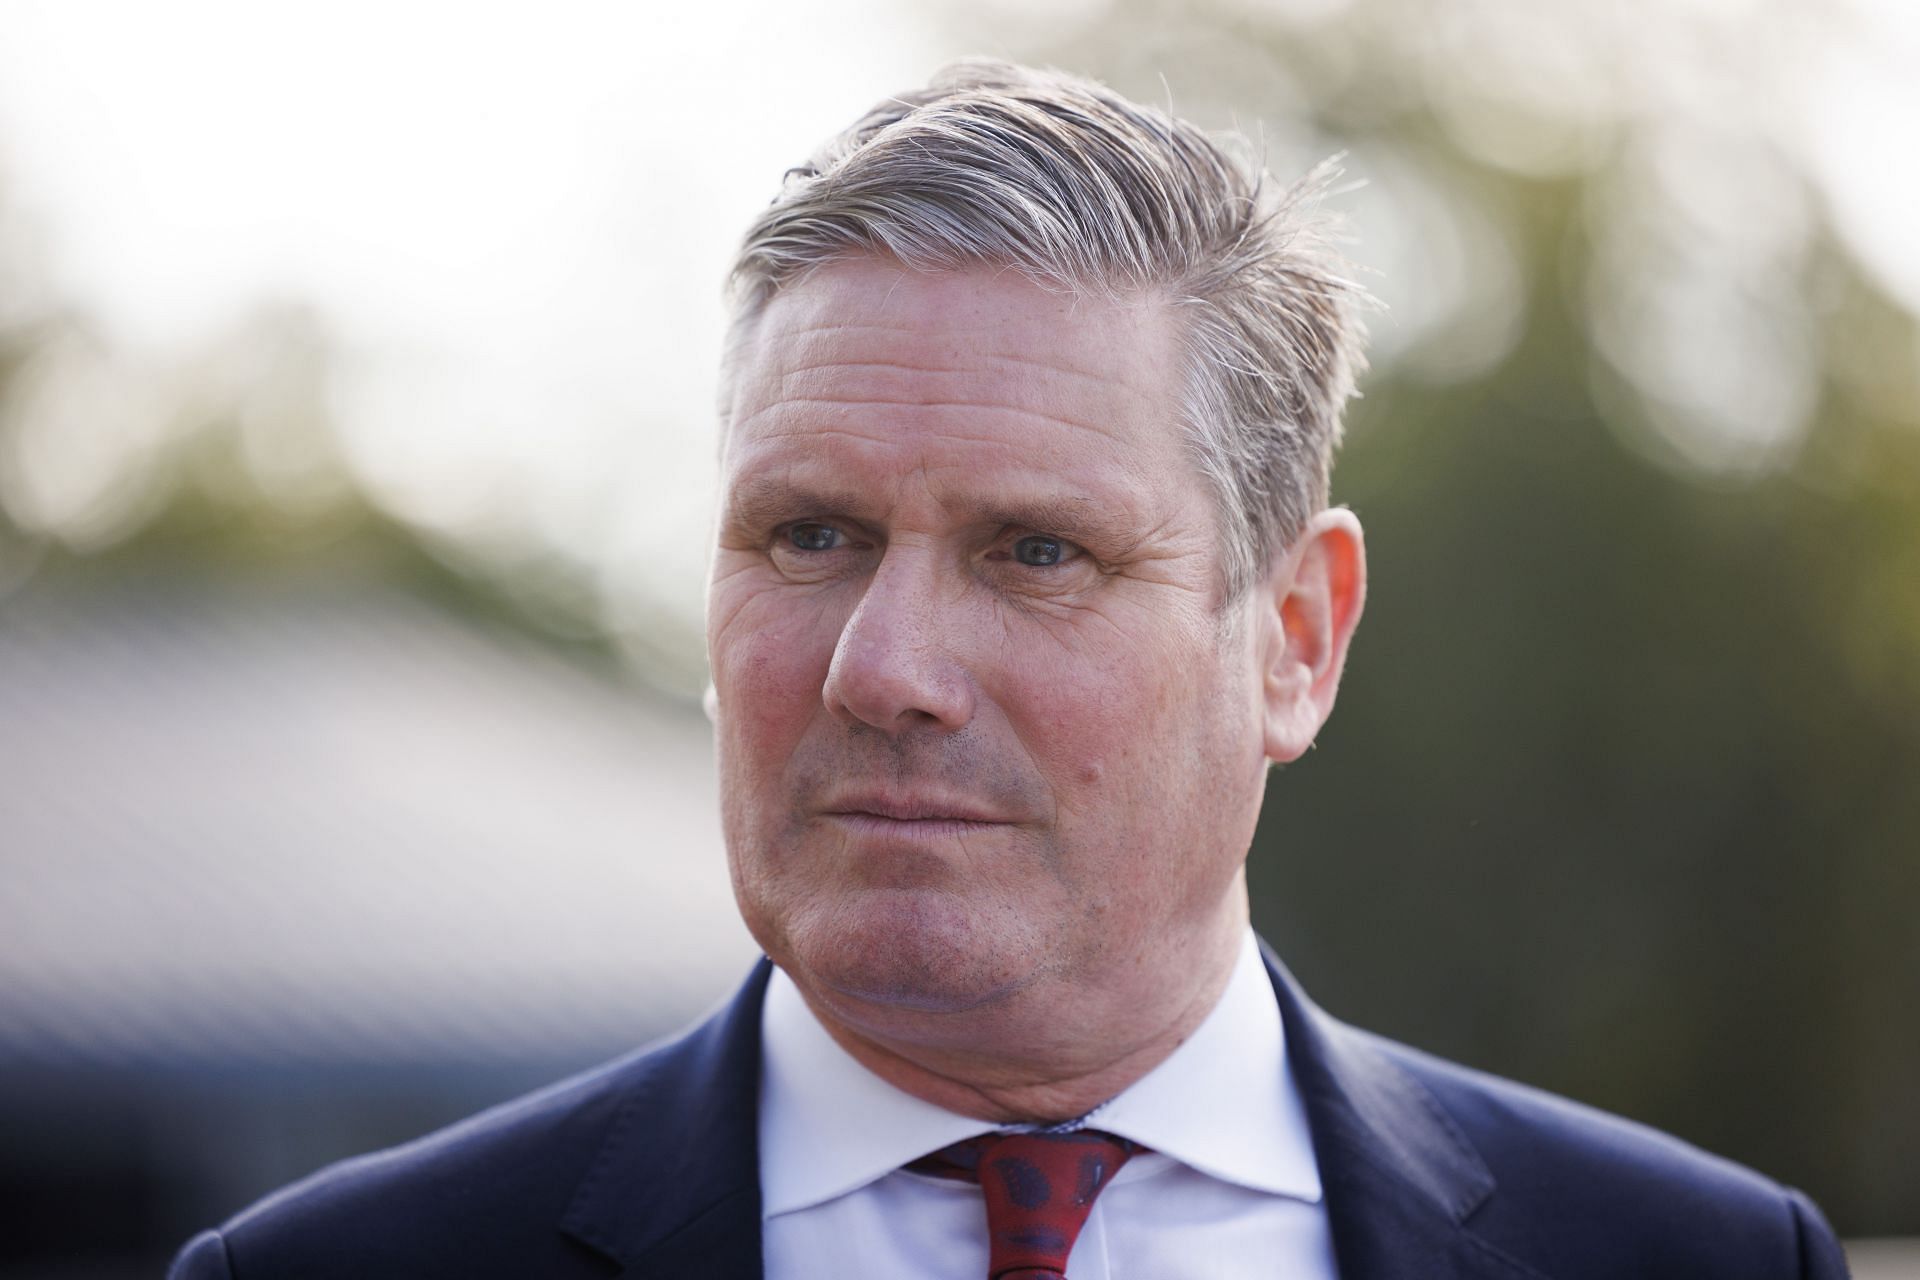 Keir Starmer, the Labour Party Leader (Image via Getty)